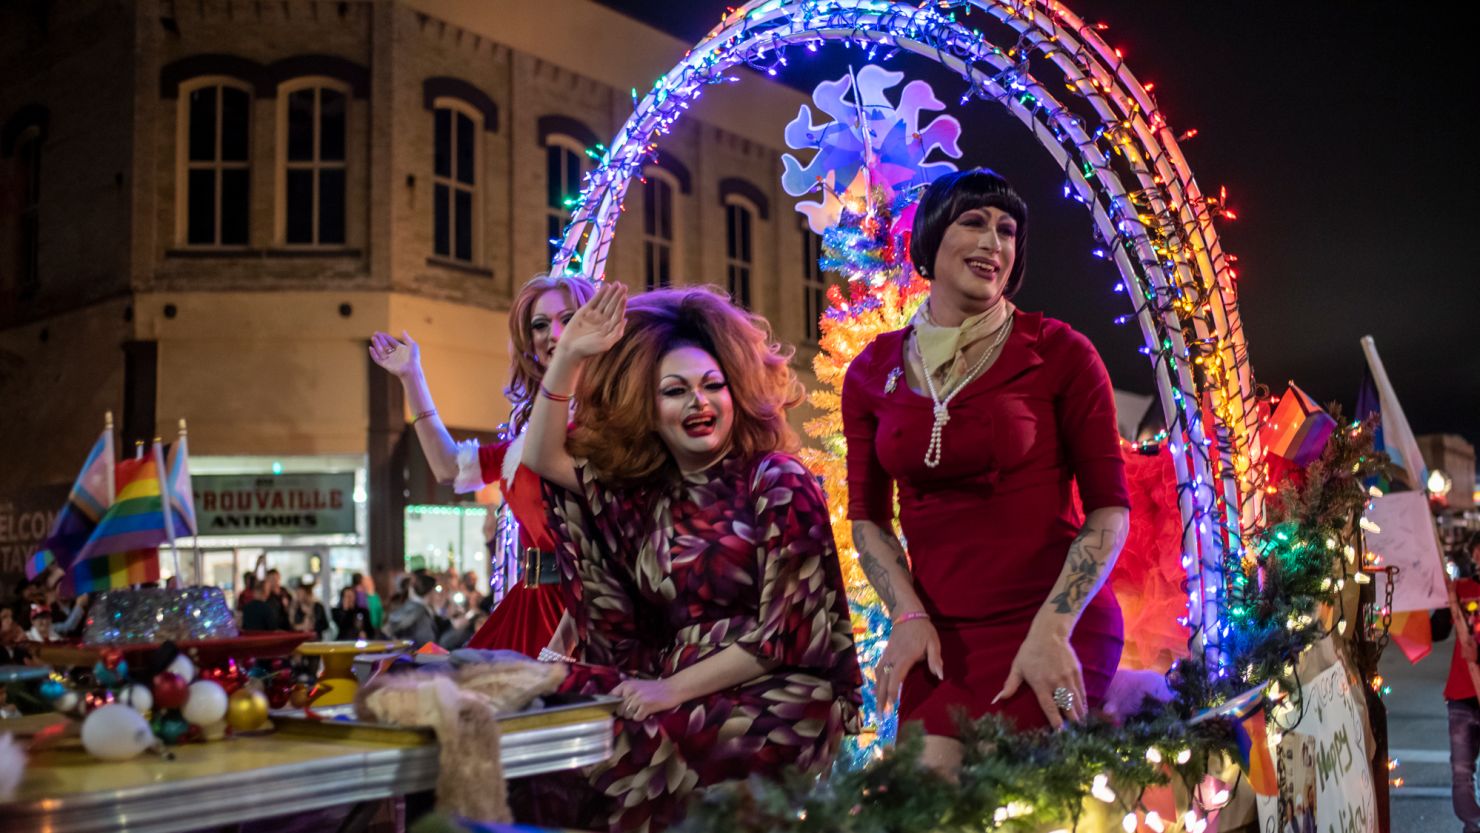 Drag queens Felicia Enspire, Alexandria Van Cartier and Sedonya Face sit on a float at a Christmas parade in Taylor, Texas, on December 3, 2022.